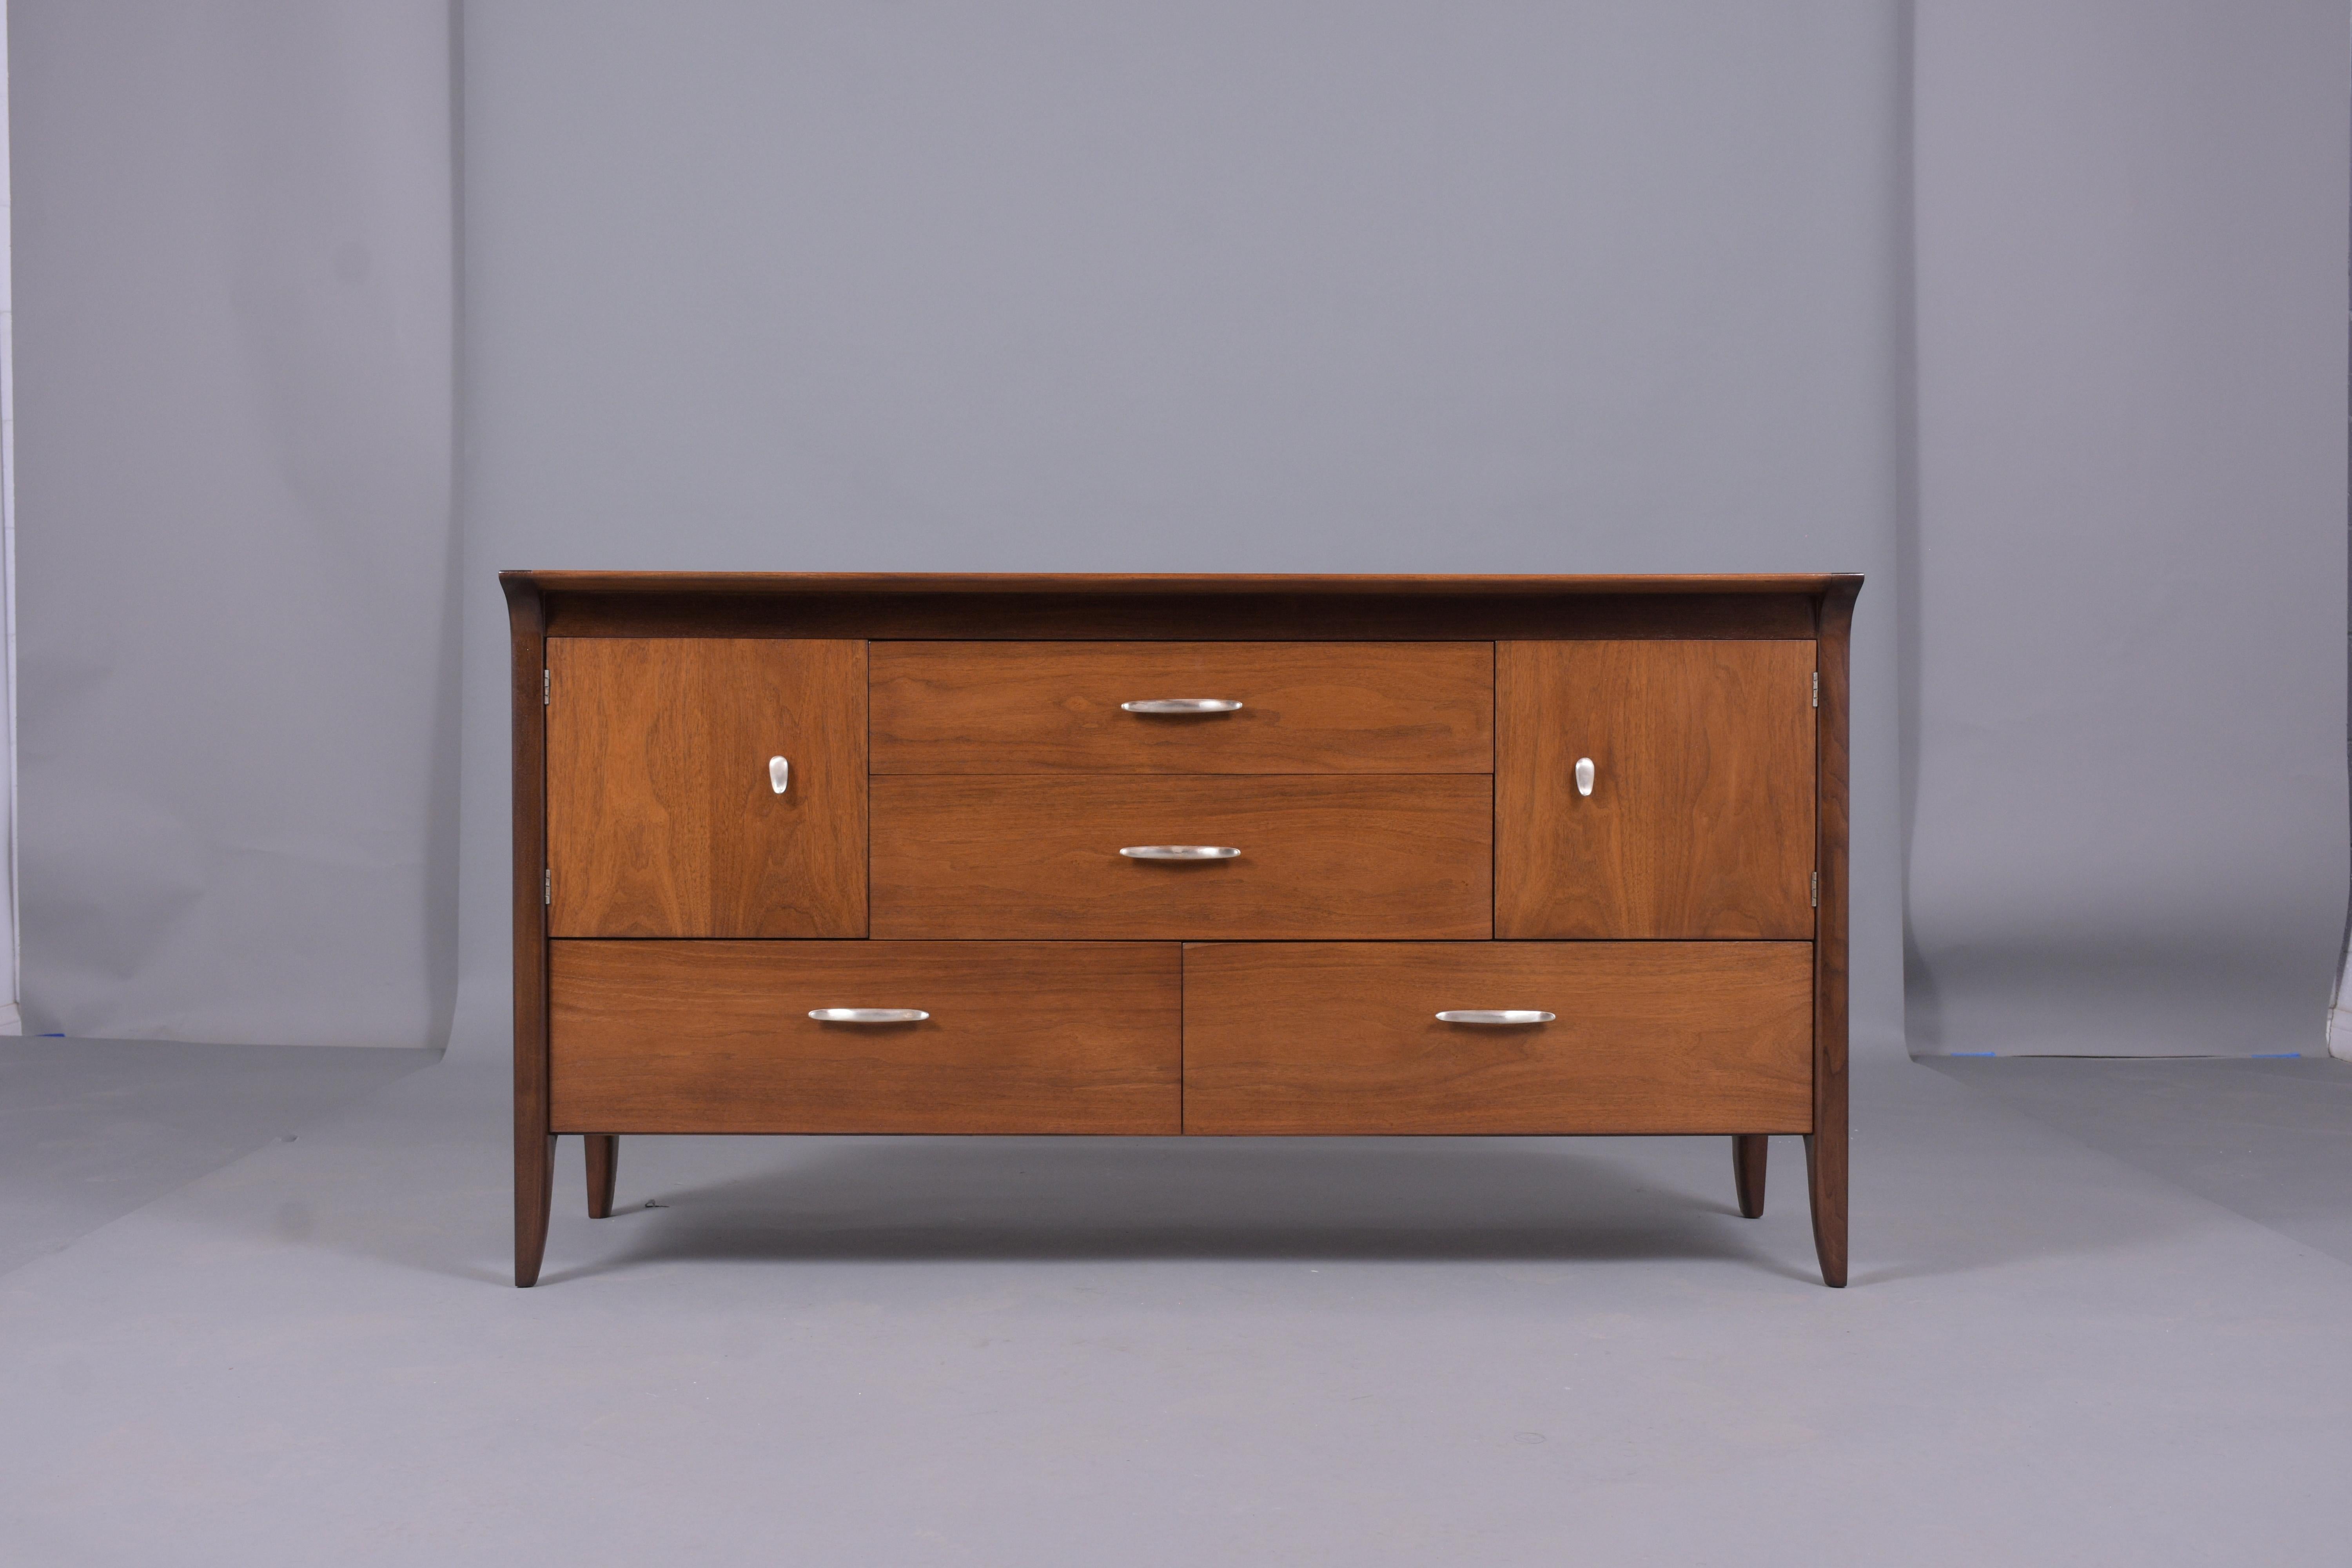 This vintage mid-century chest of drawers is crafted out of walnut and has been professionally restored by our team of in-house craftsmen. The dresser has been newly stained/lacquered finish, features four pull-out drawers, two doors with cubby